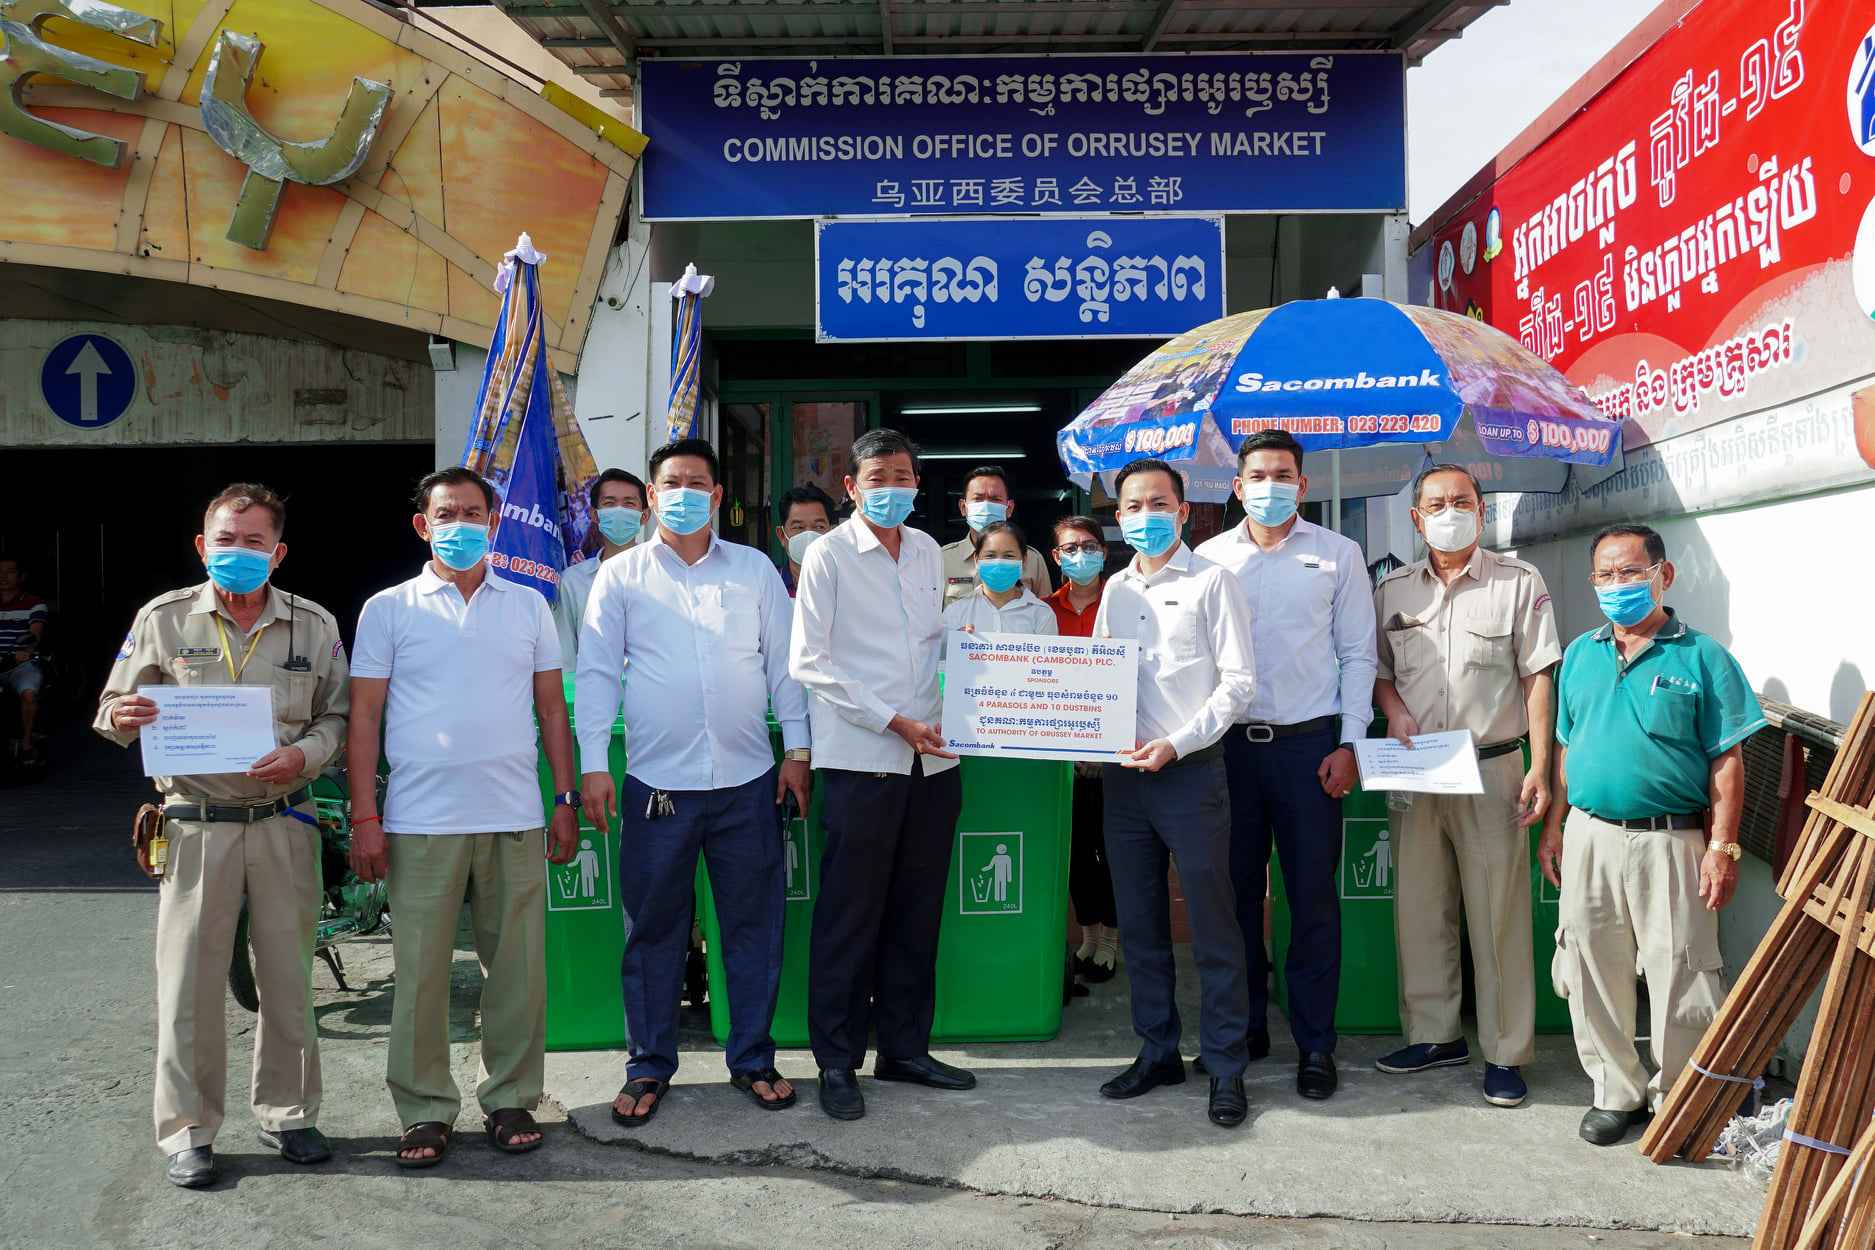 Sacombank Cambodia sponsored umbrellas and dustbins to Orussey Market Commission